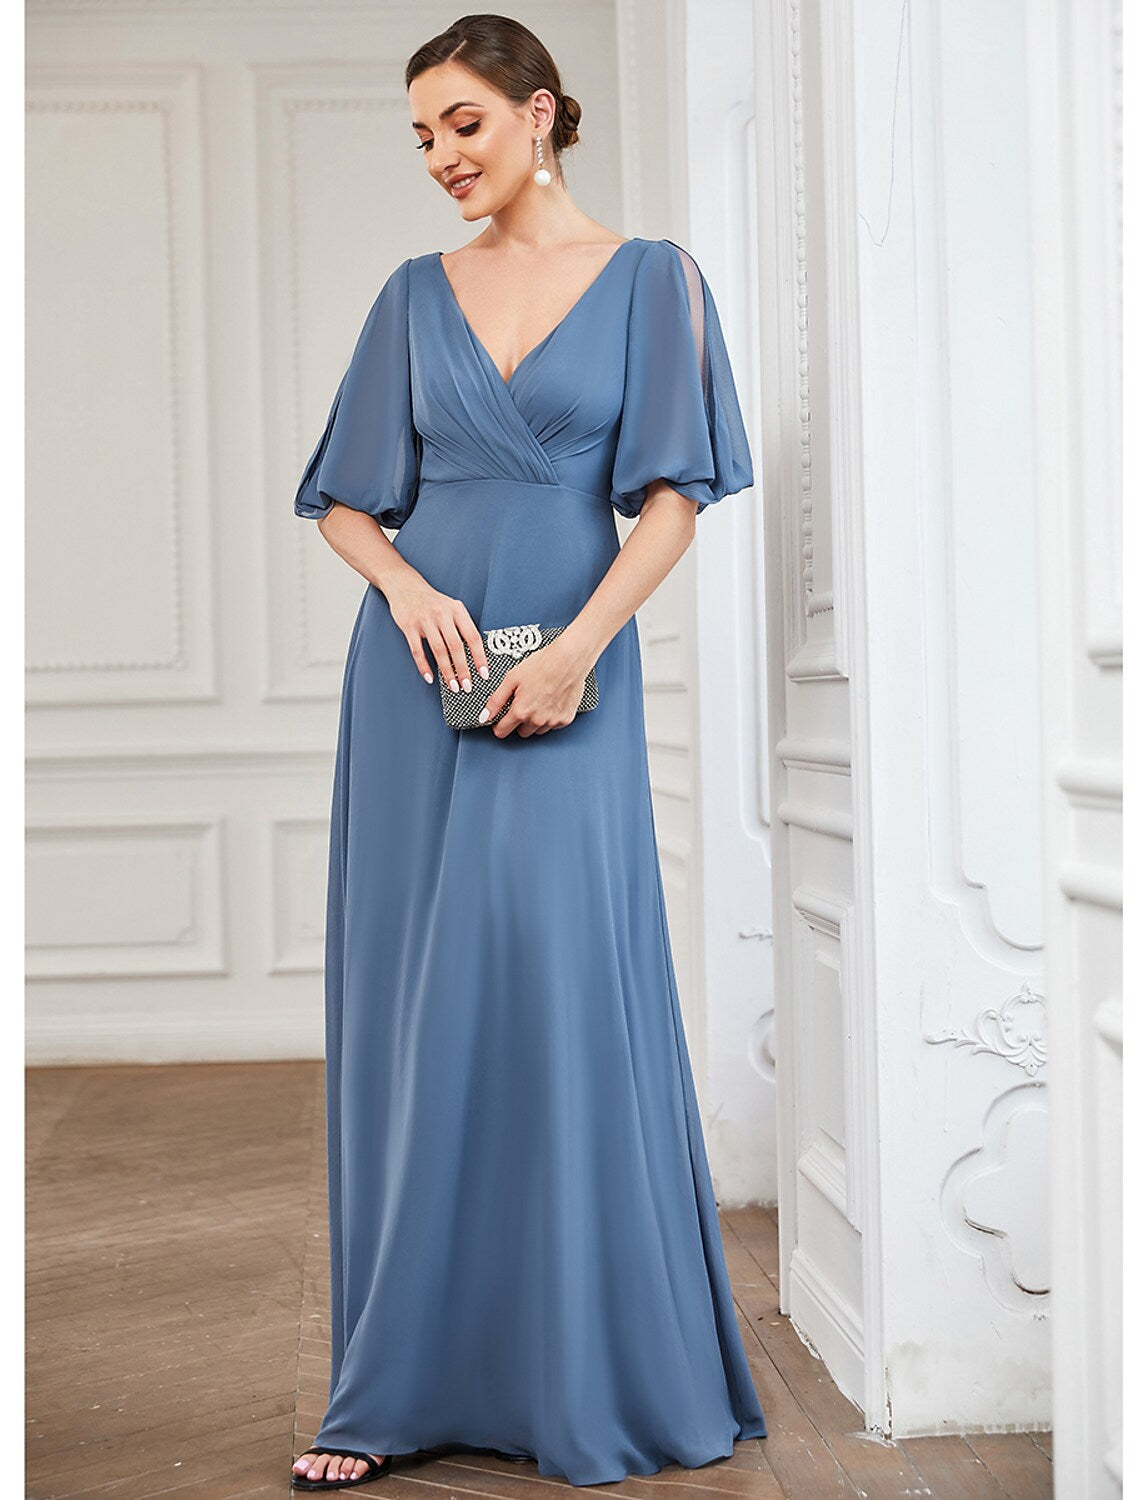 A-Line Evening Gown Dress Wedding Guest Floor Length Half Sleeve V Neck Chiffon with Pleats